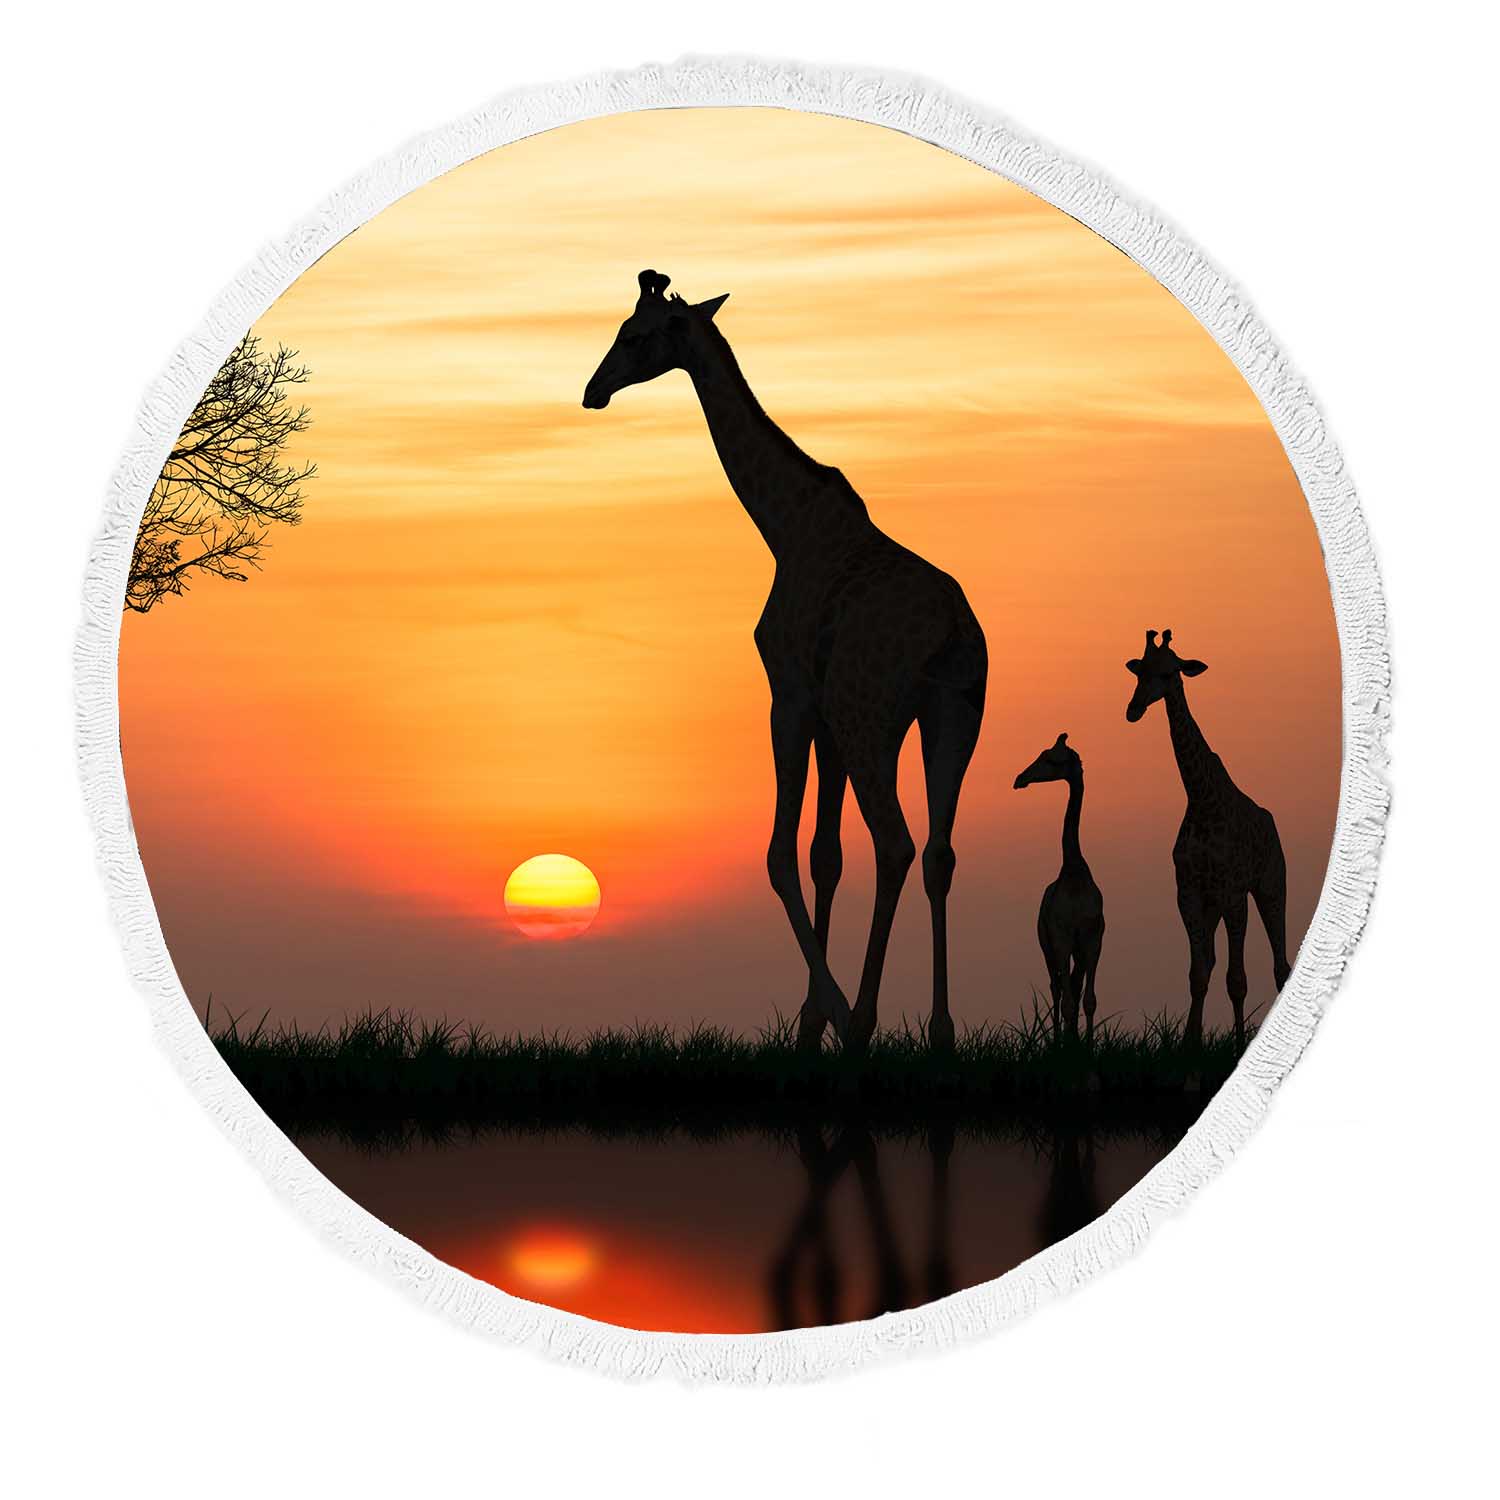 PKQWTM Silhouette Of Giraffe With Reflection In Water Round Beach Towel Beach Mats Shawl Blanket Yoga Mat with Tassels Beach Throw Towel - image 1 of 1